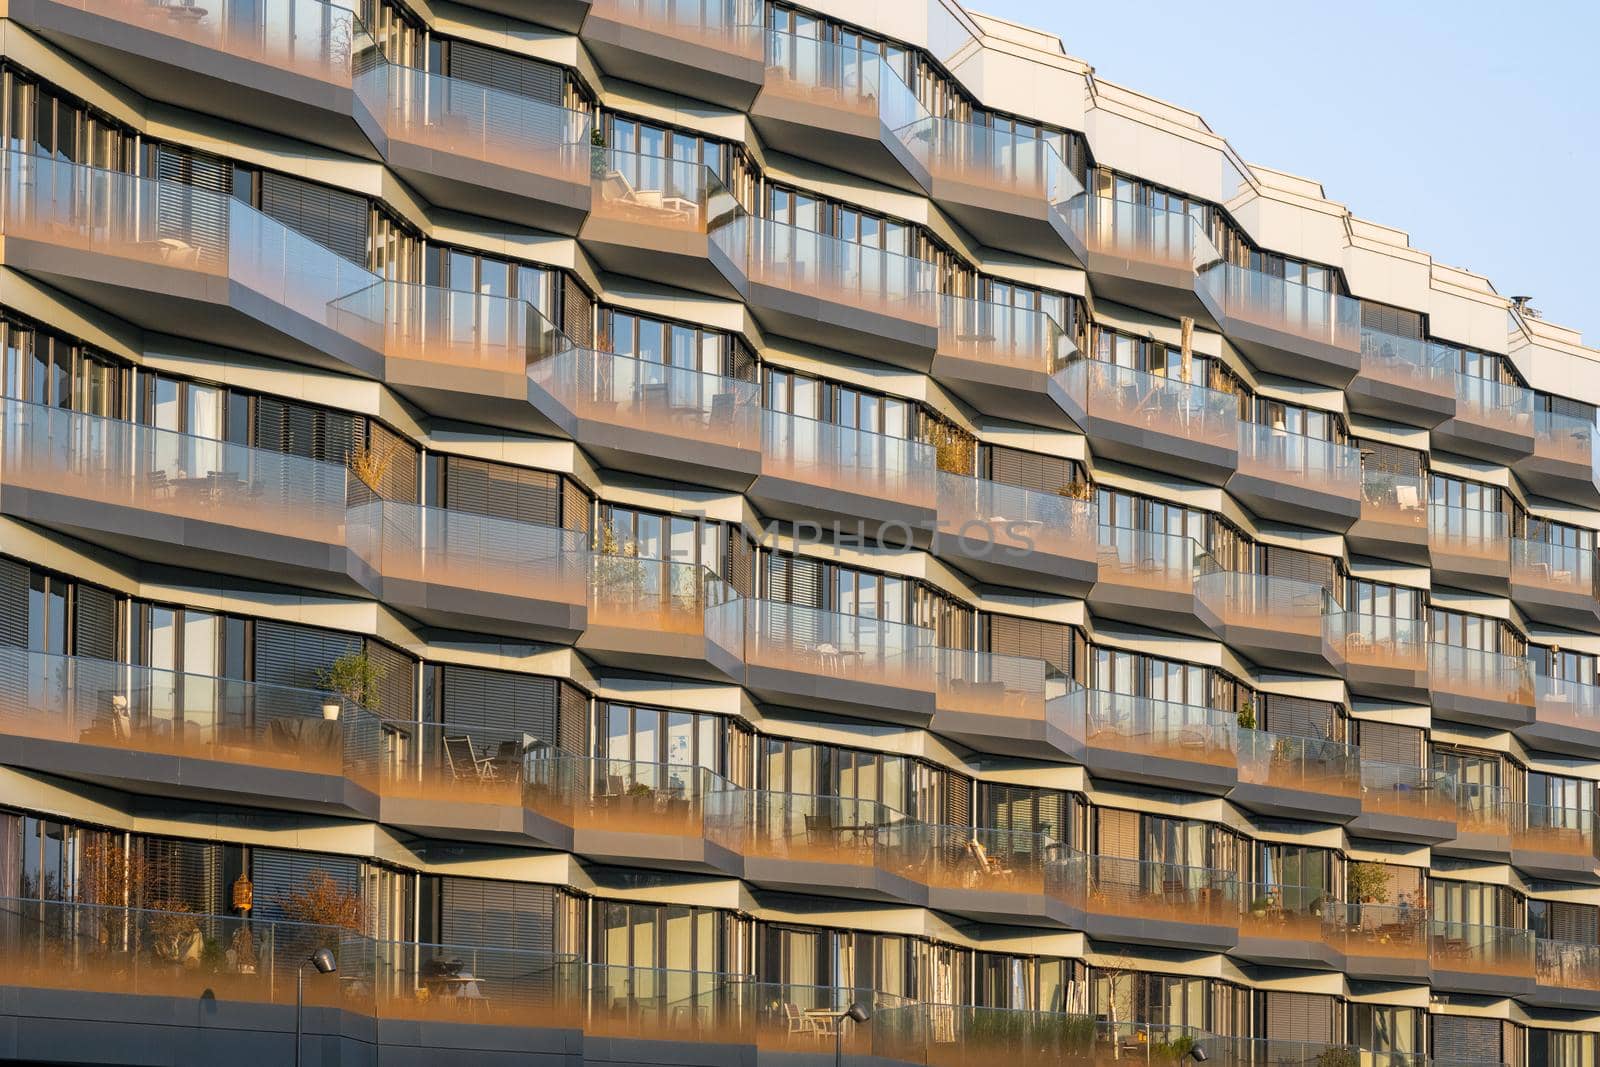 Facade of a modern apartment building with a lot of glass seen in Berlin, Germany